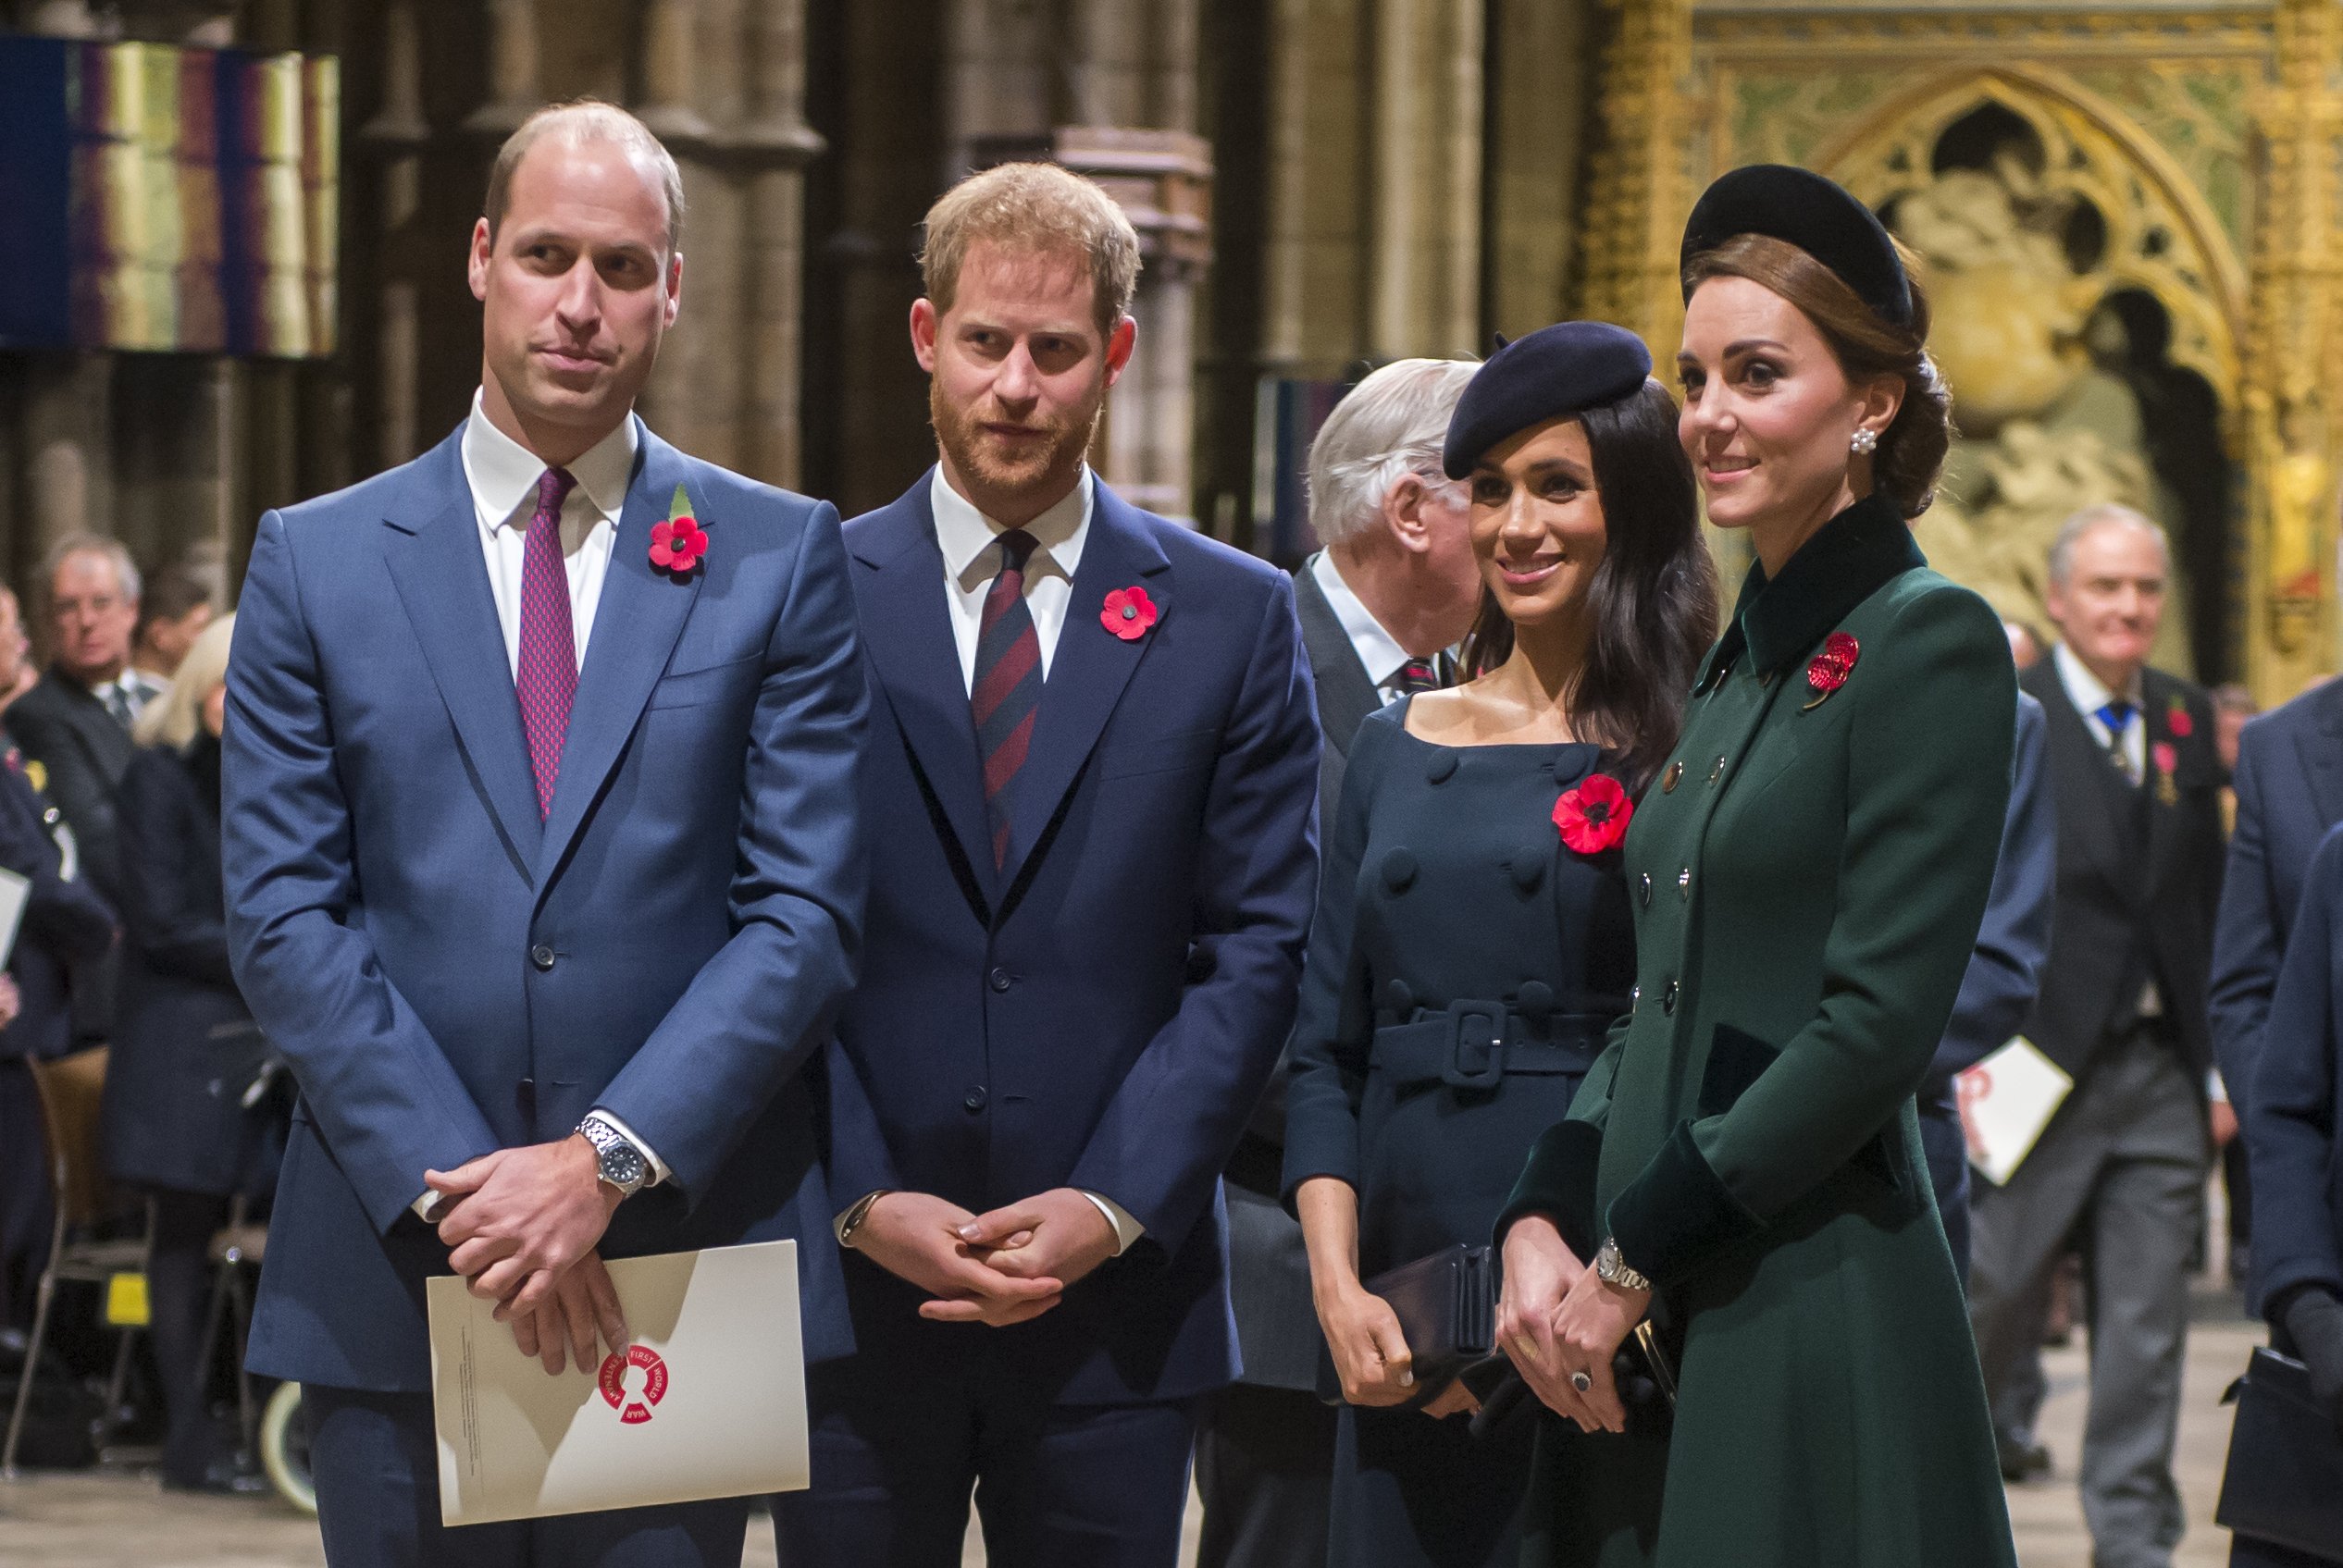 Prince William, Catherine, Duchess of Cambridge, Prince Harry, and Meghan, Duchess of Sussex attend a service marking the centenary of the WW1 armistice at Westminster Abbey on November 11, 2018, in London, England. | Source: Getty Images